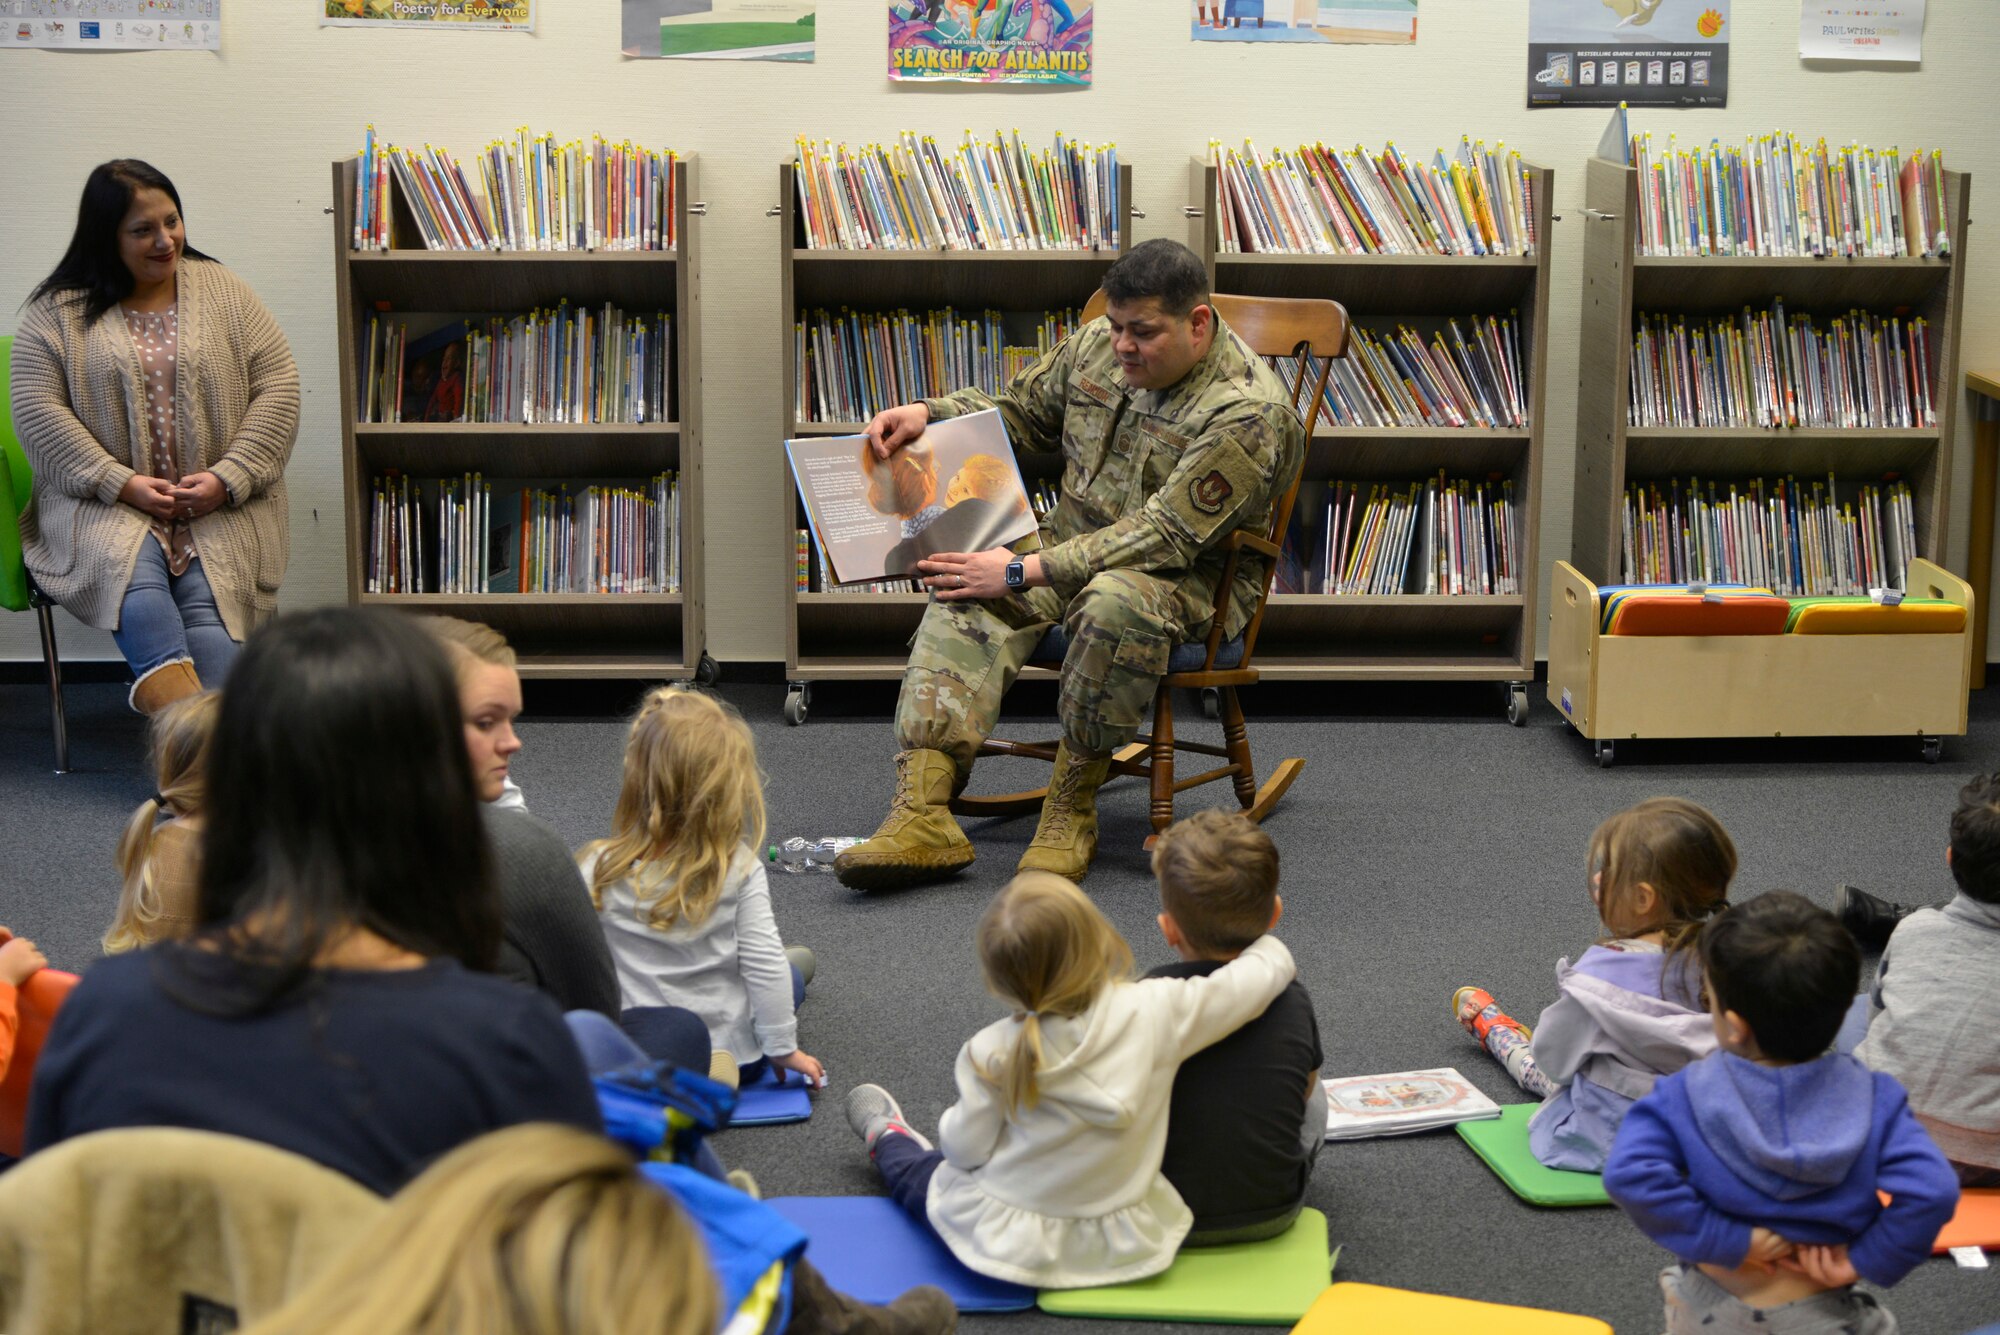 U.S. Air Force Chief Master Sgt. Ernesto J. Rendon, 86th Airlift Wing command chief, reads to children during Story Time at Ramstein Library, Ramstein Air Base, Nov. 21, 2019. Throughout December, each Story Time will celebrate a different holiday of the season. (U.S. Air Force photo by Airman 1st Class John R. Wright)